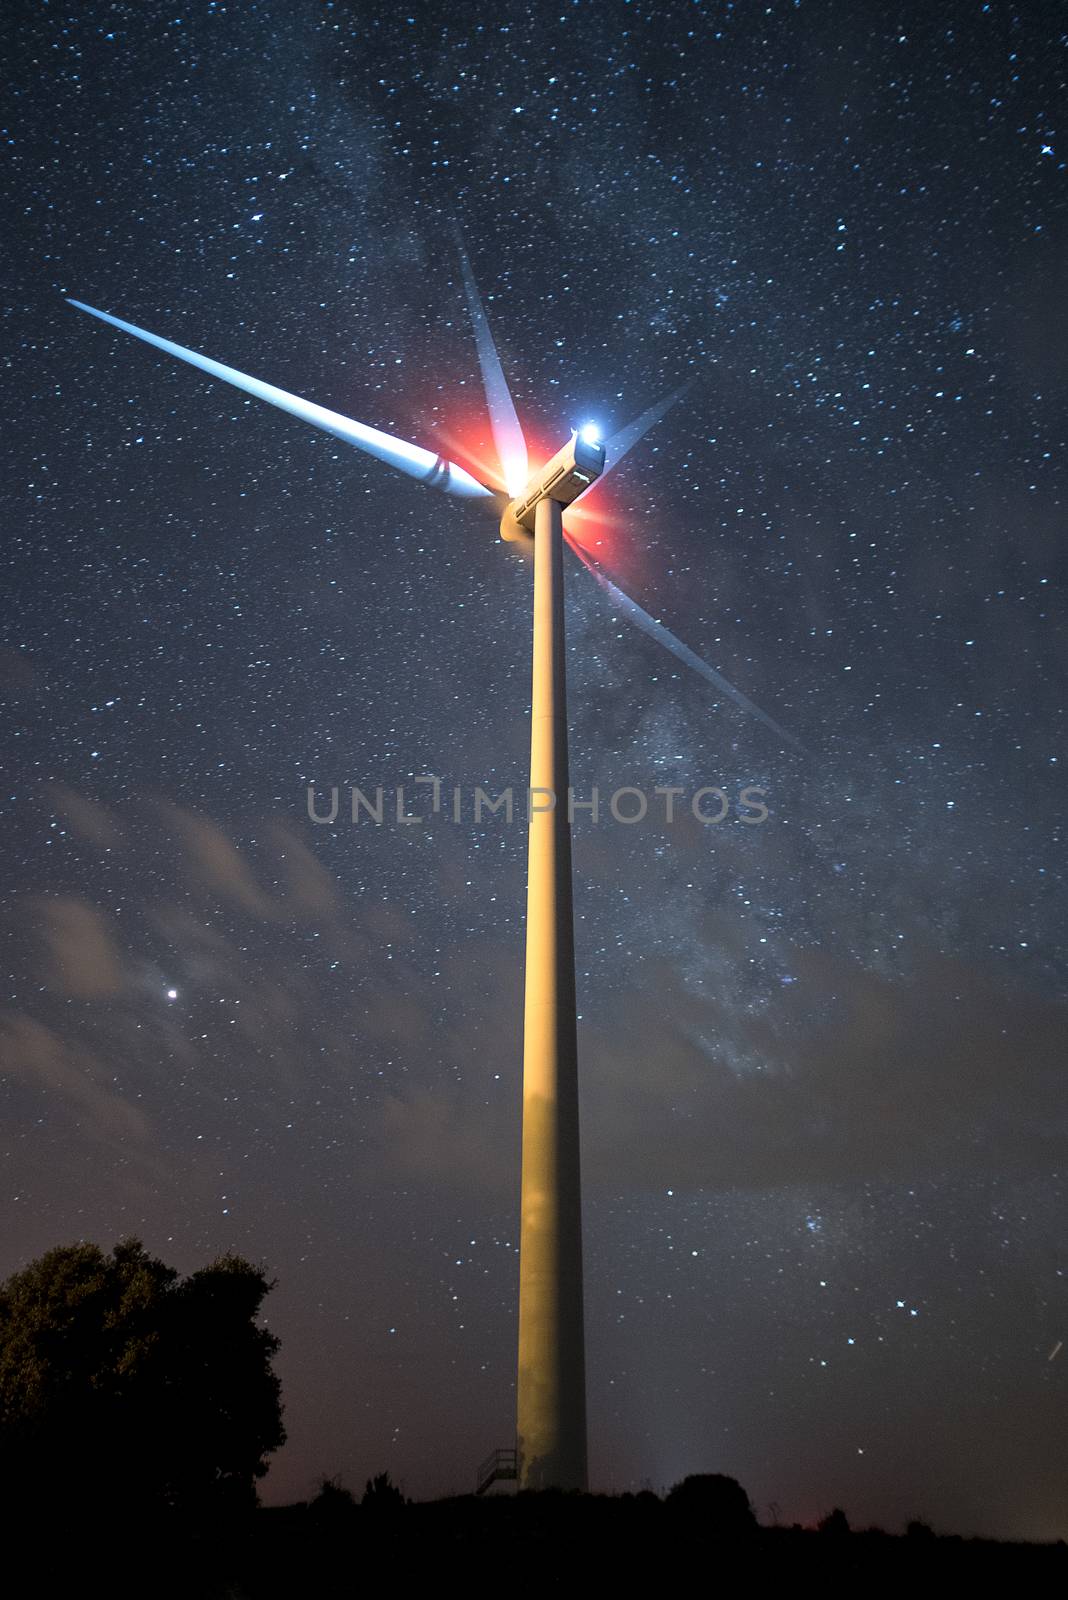 windmills, wind turbines. Power and energy, night photography  by jalonsohu@gmail.com